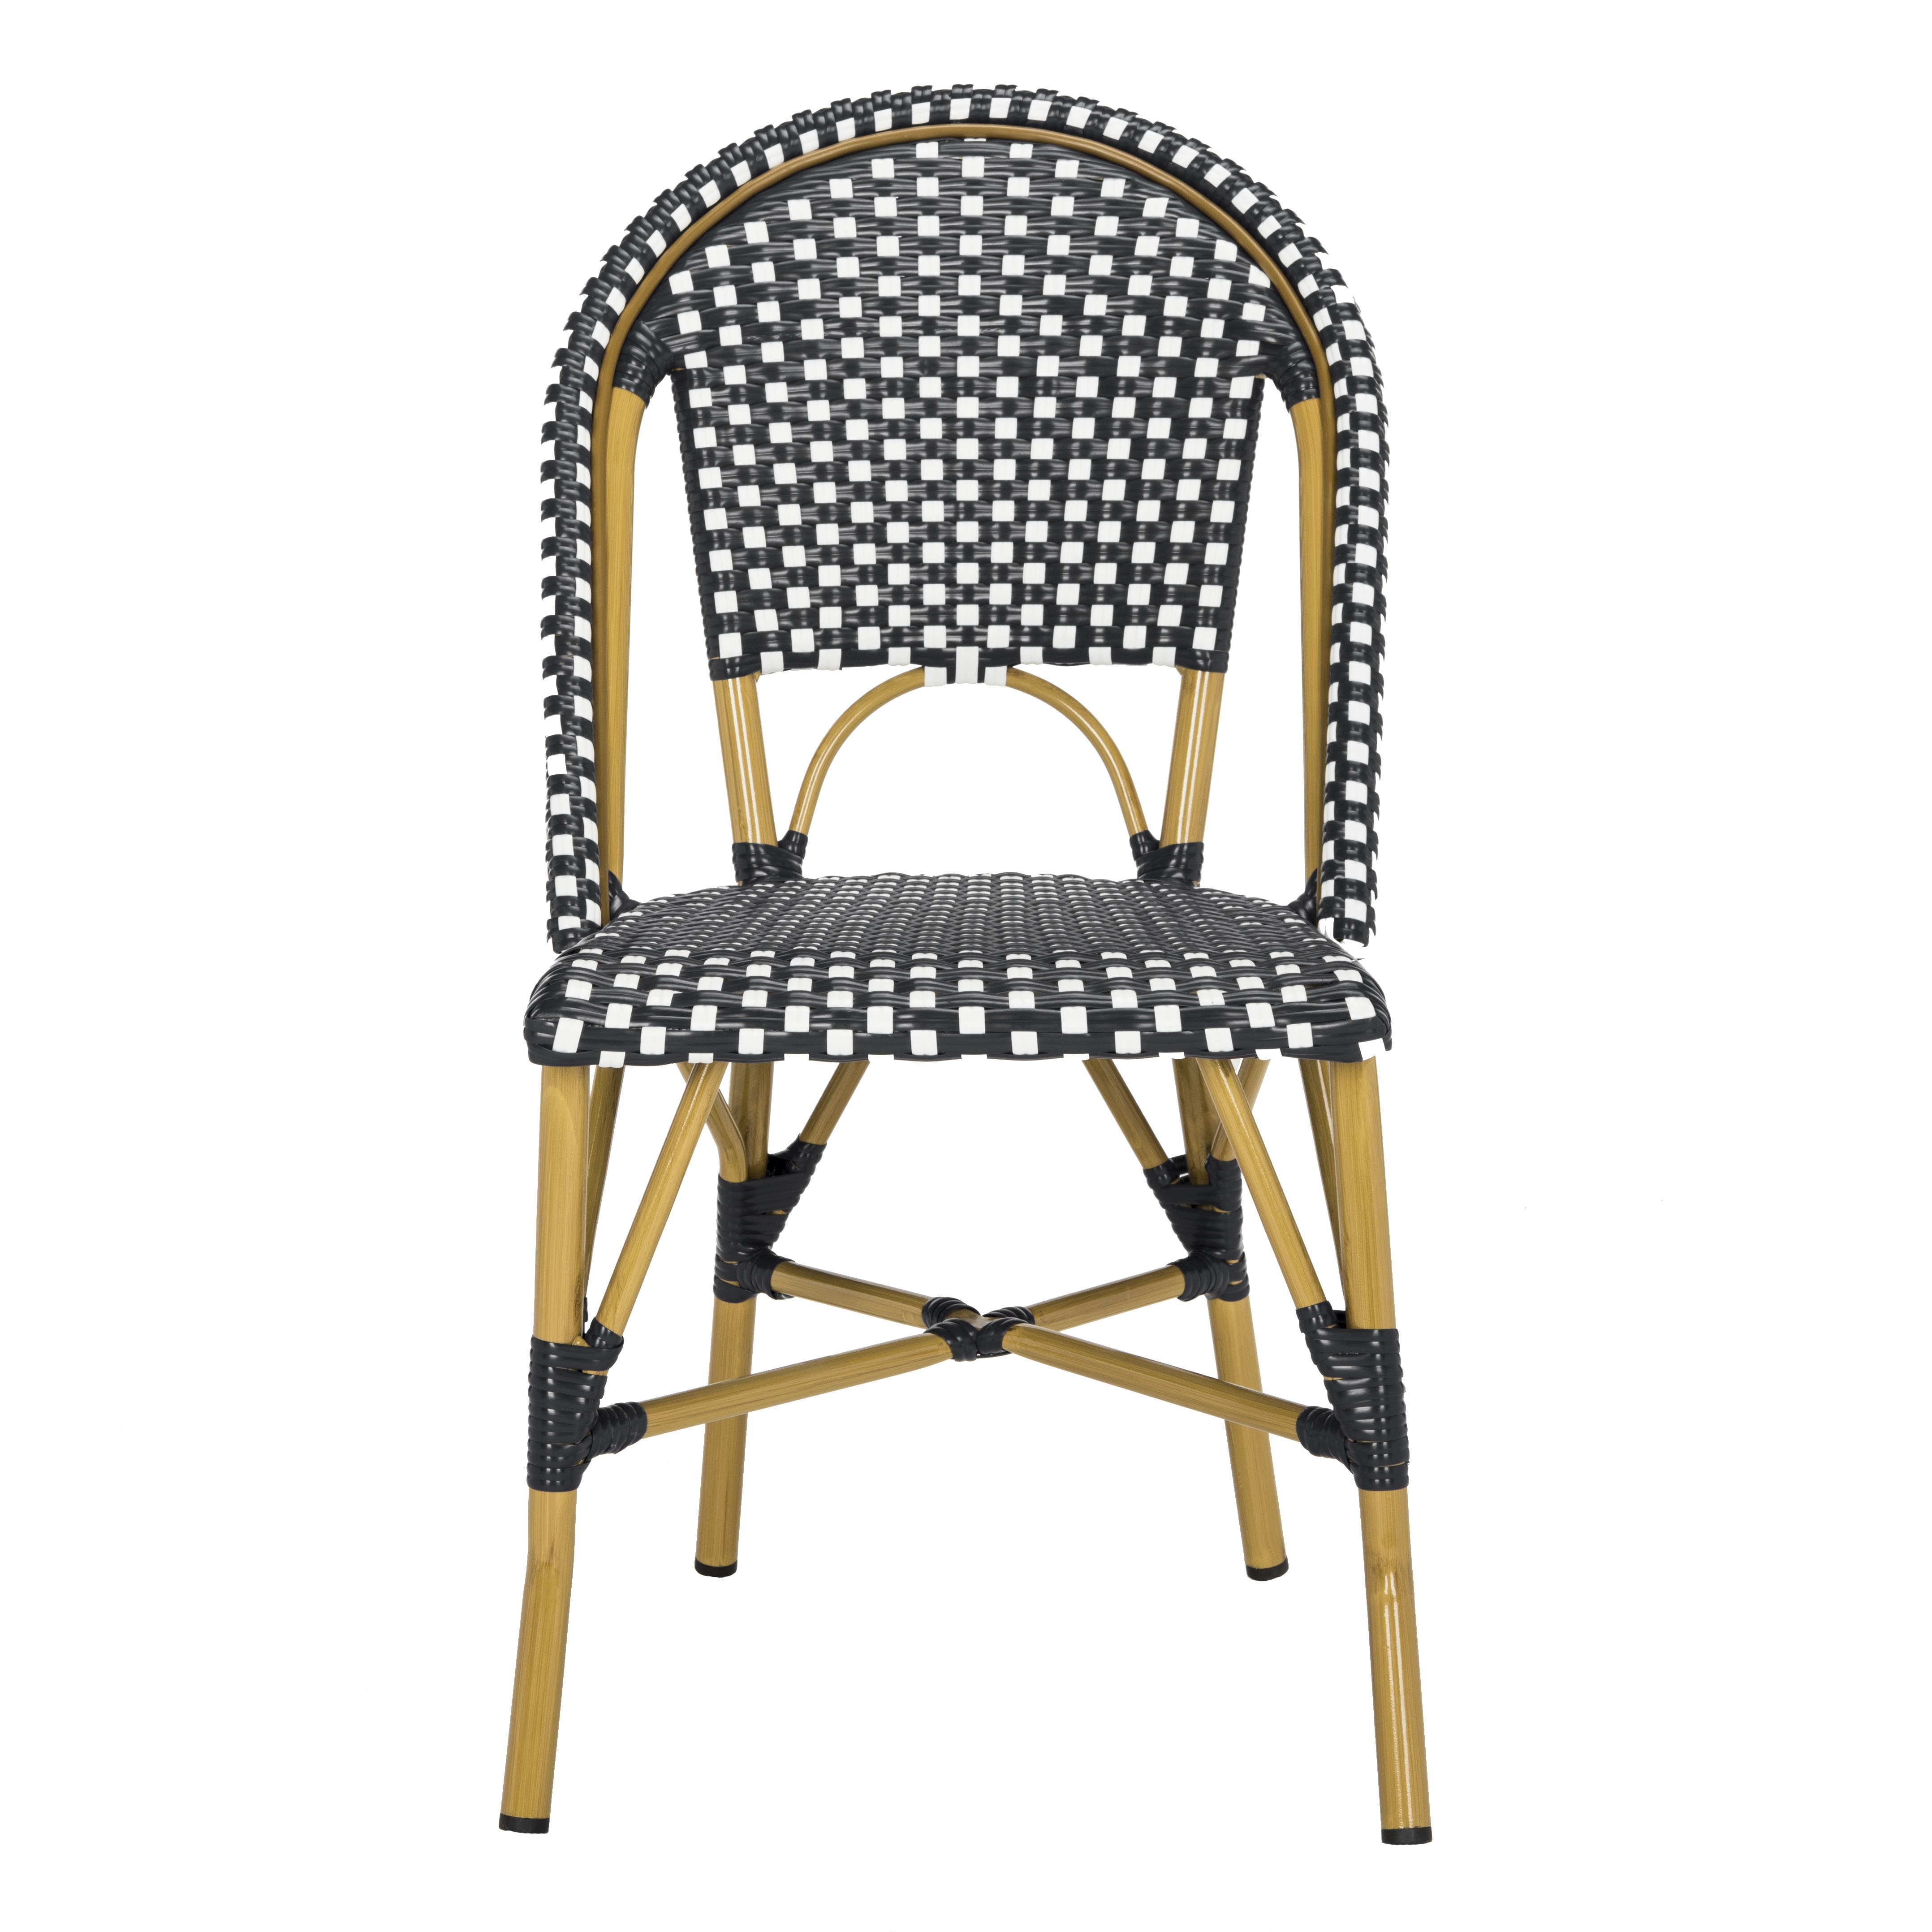 Salcha Indoor-Outdoor French Bistro Stacking Side Chair - Black/White/Light Brown - Arlo Home - Image 1